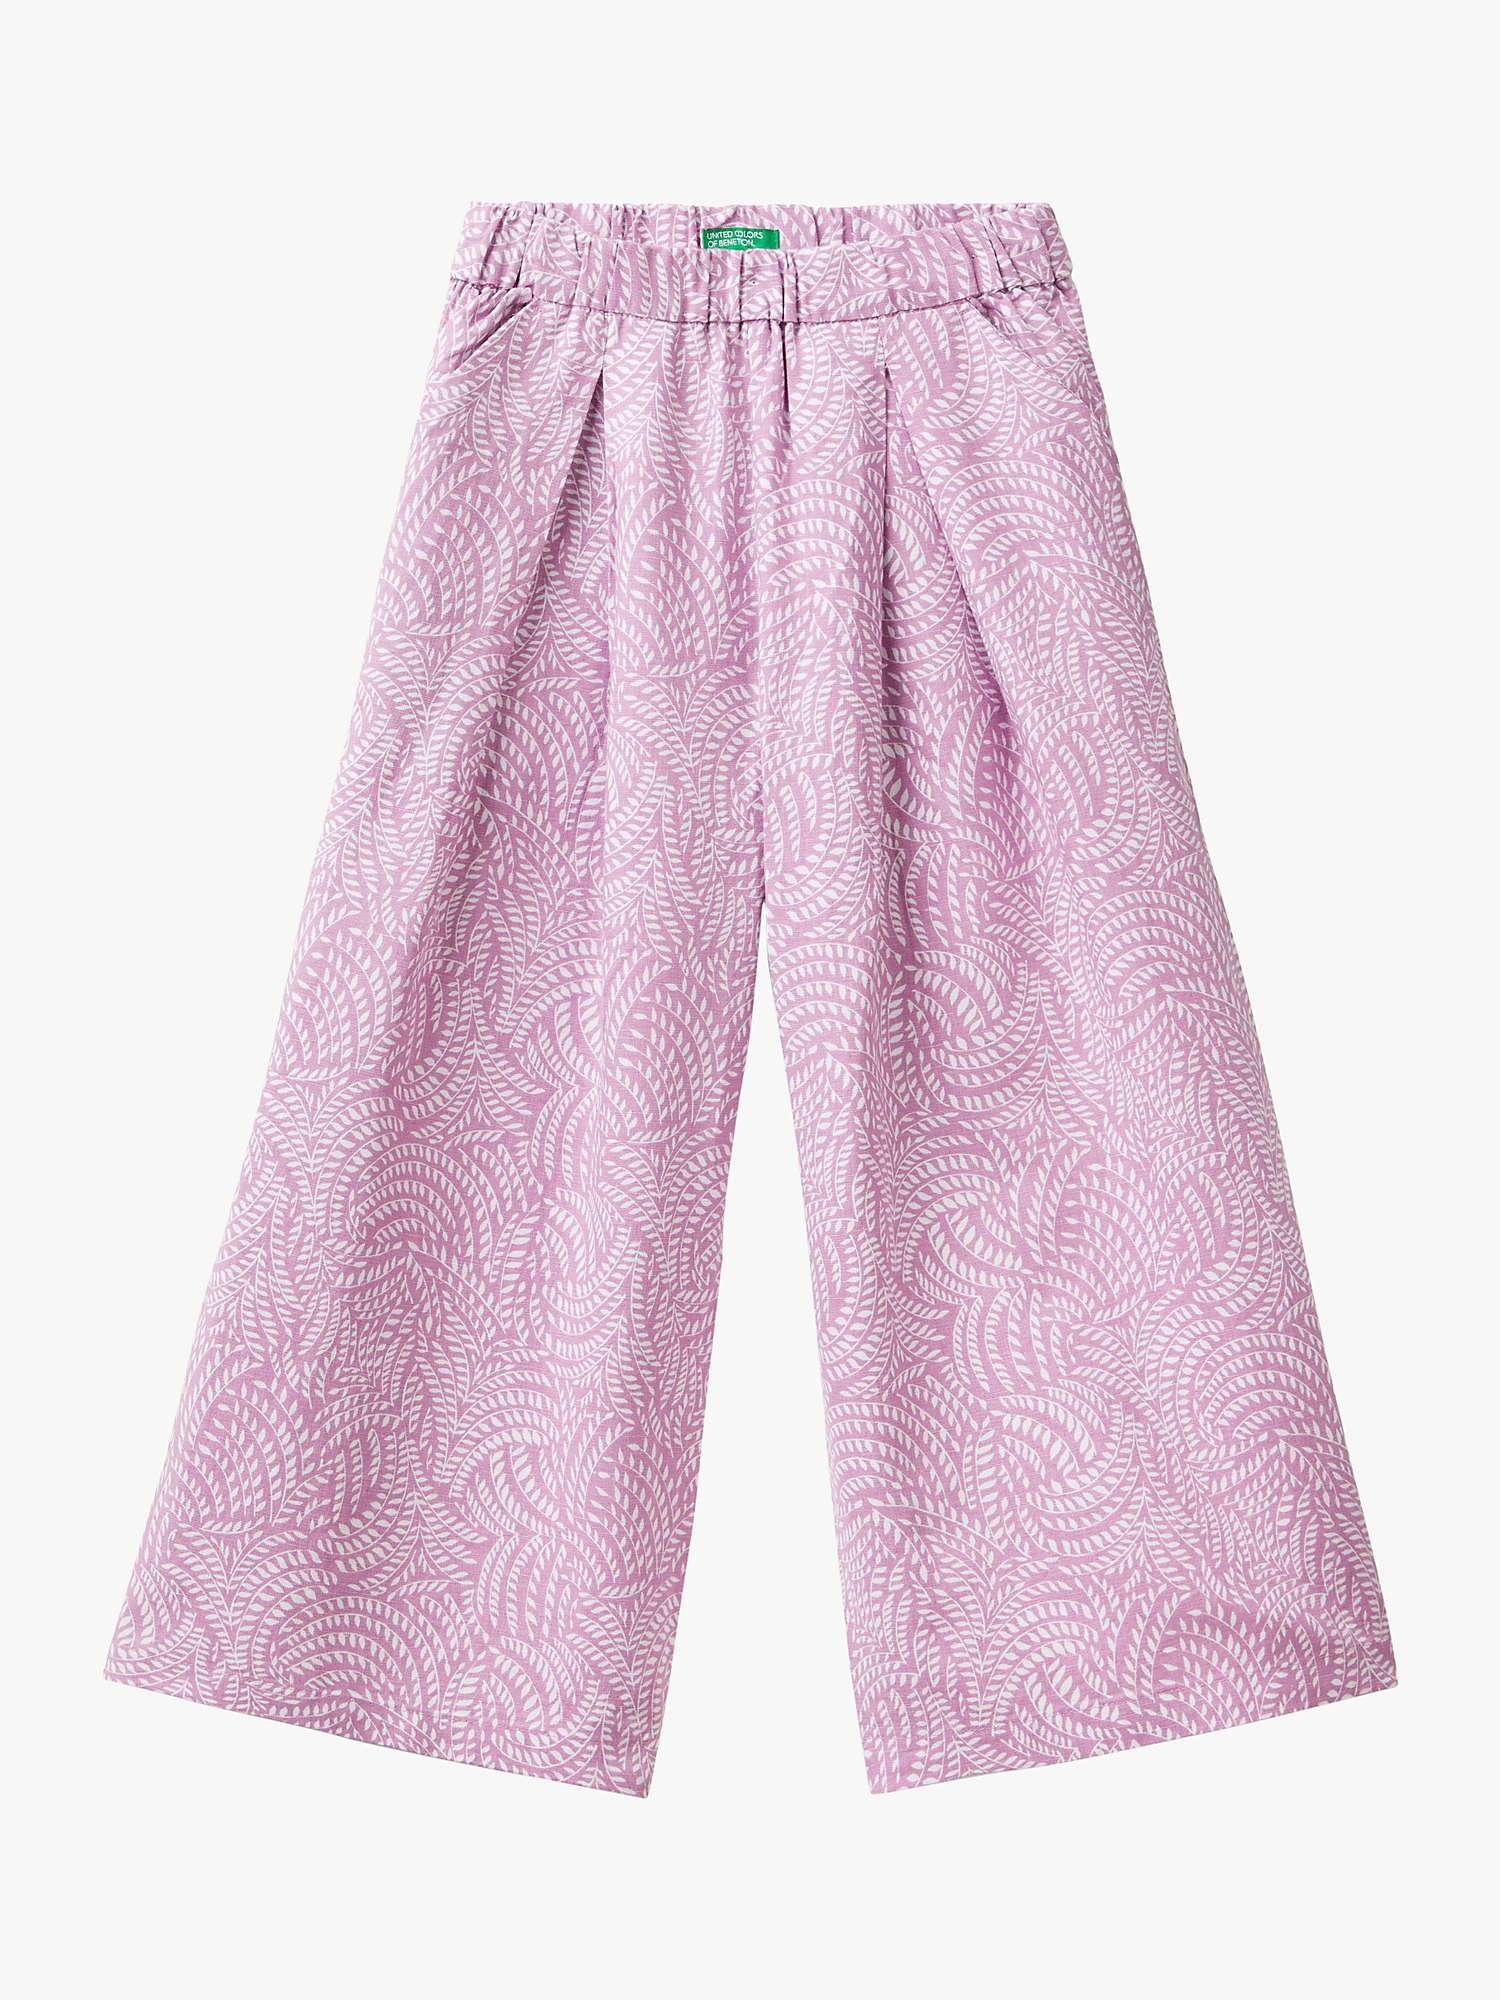 Buy Benetton Kids' Linen Blend Abstract Leaf Print Wide Leg Trousers, Lilac/Multi Online at johnlewis.com